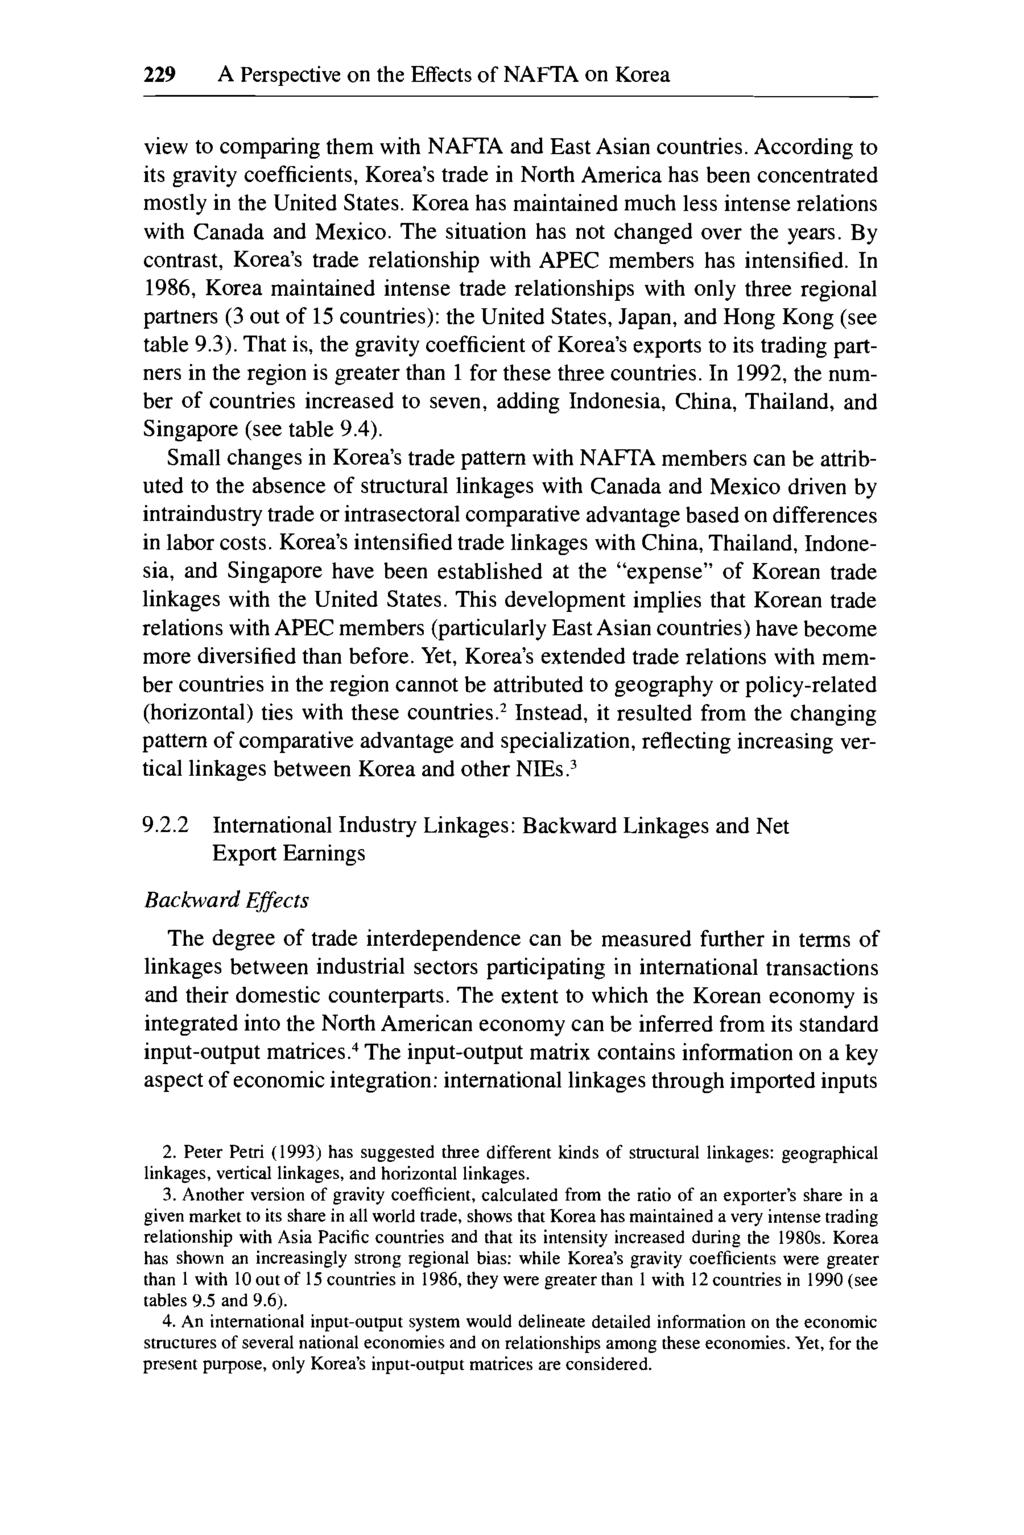 229 A Perspective on the Effects of NAFTA on Korea view to comparing them with NAFTA and East Asian countries.